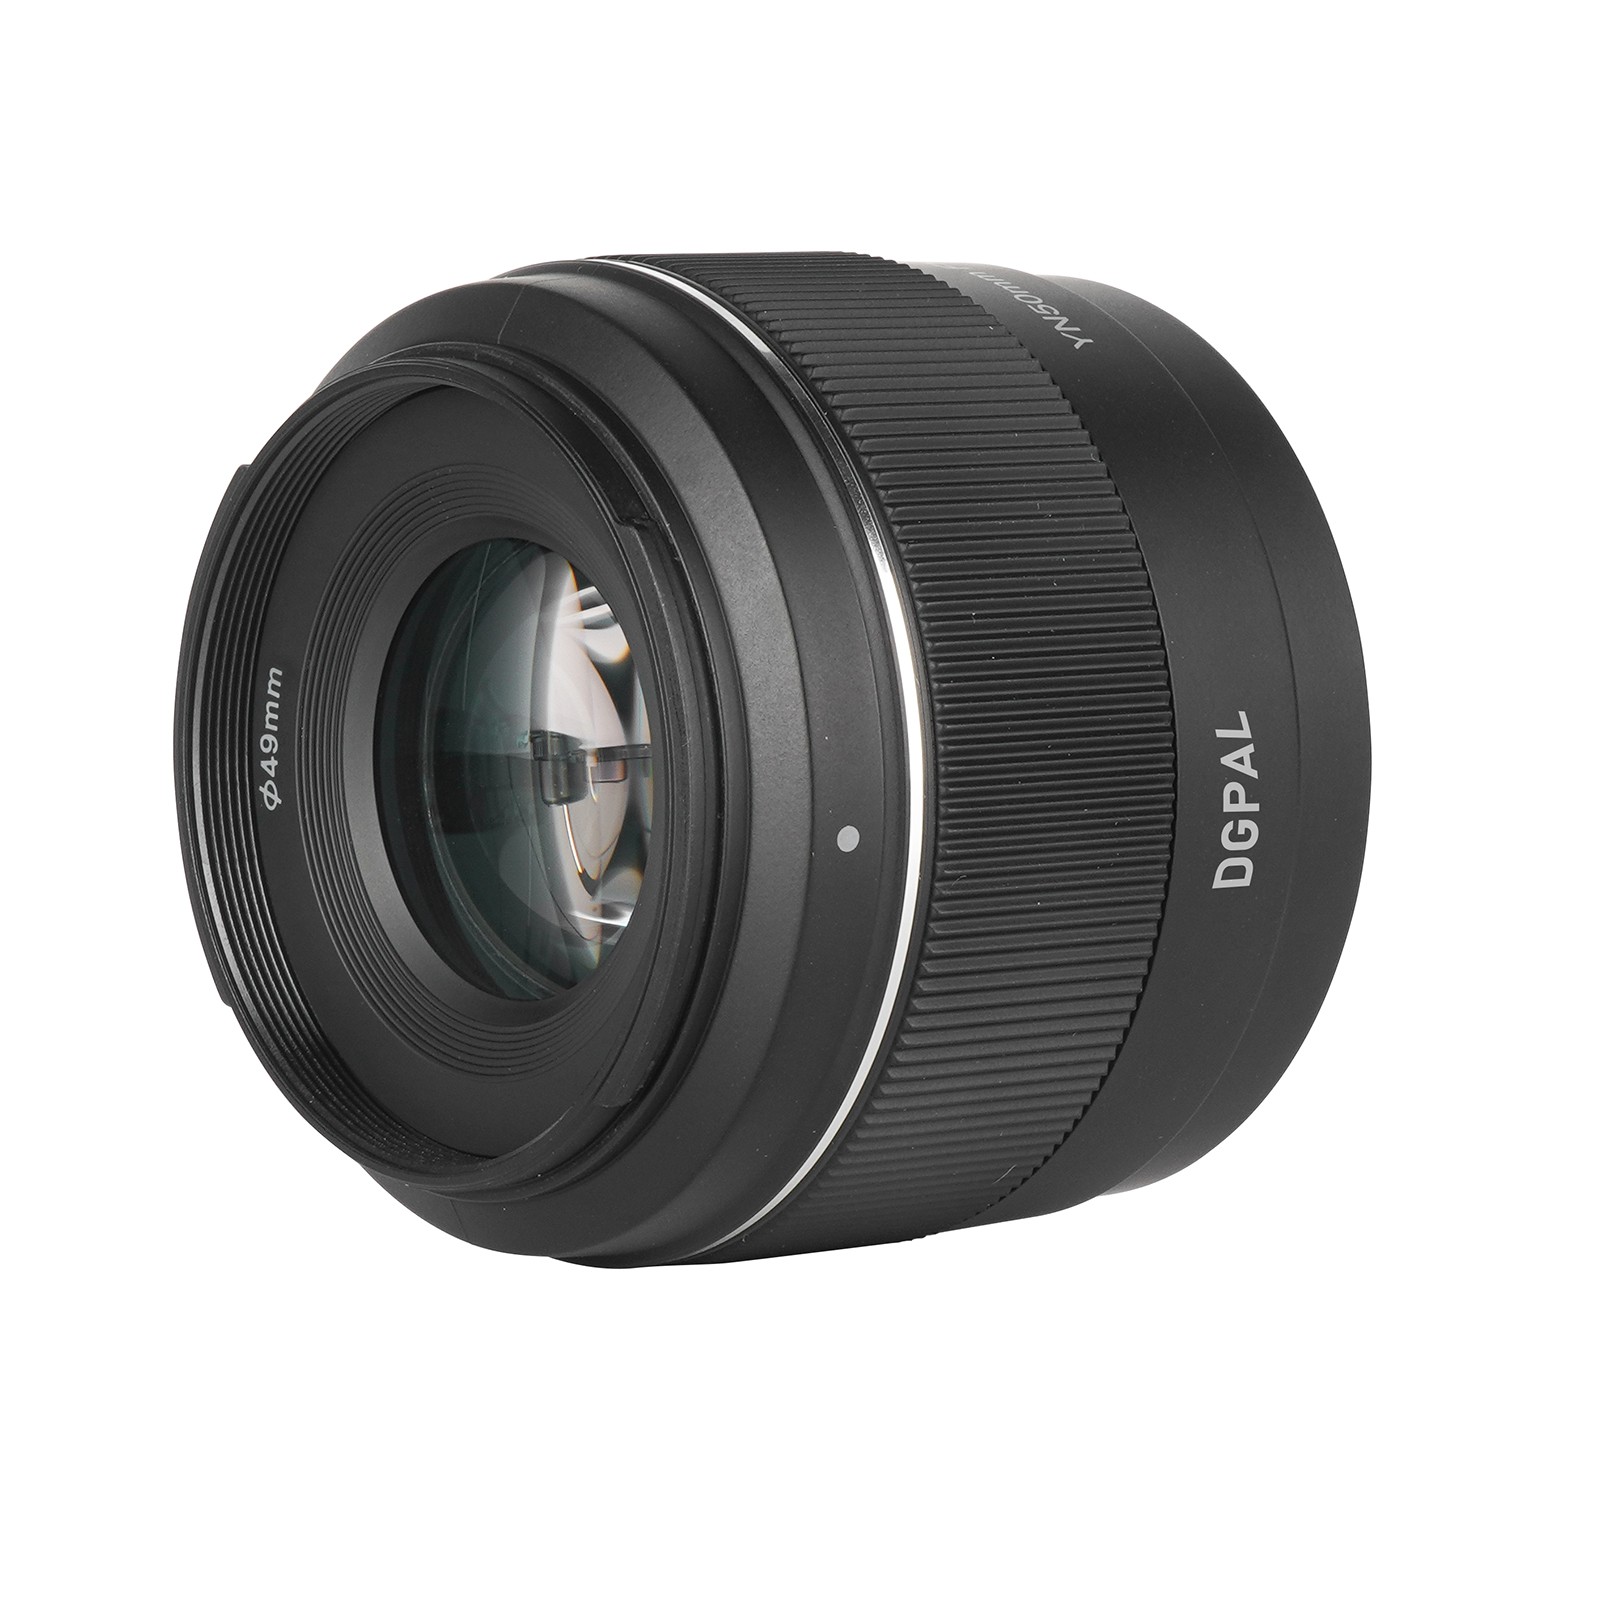 DGPAL 50mm F1.8 Prime Lens for Sony Camera